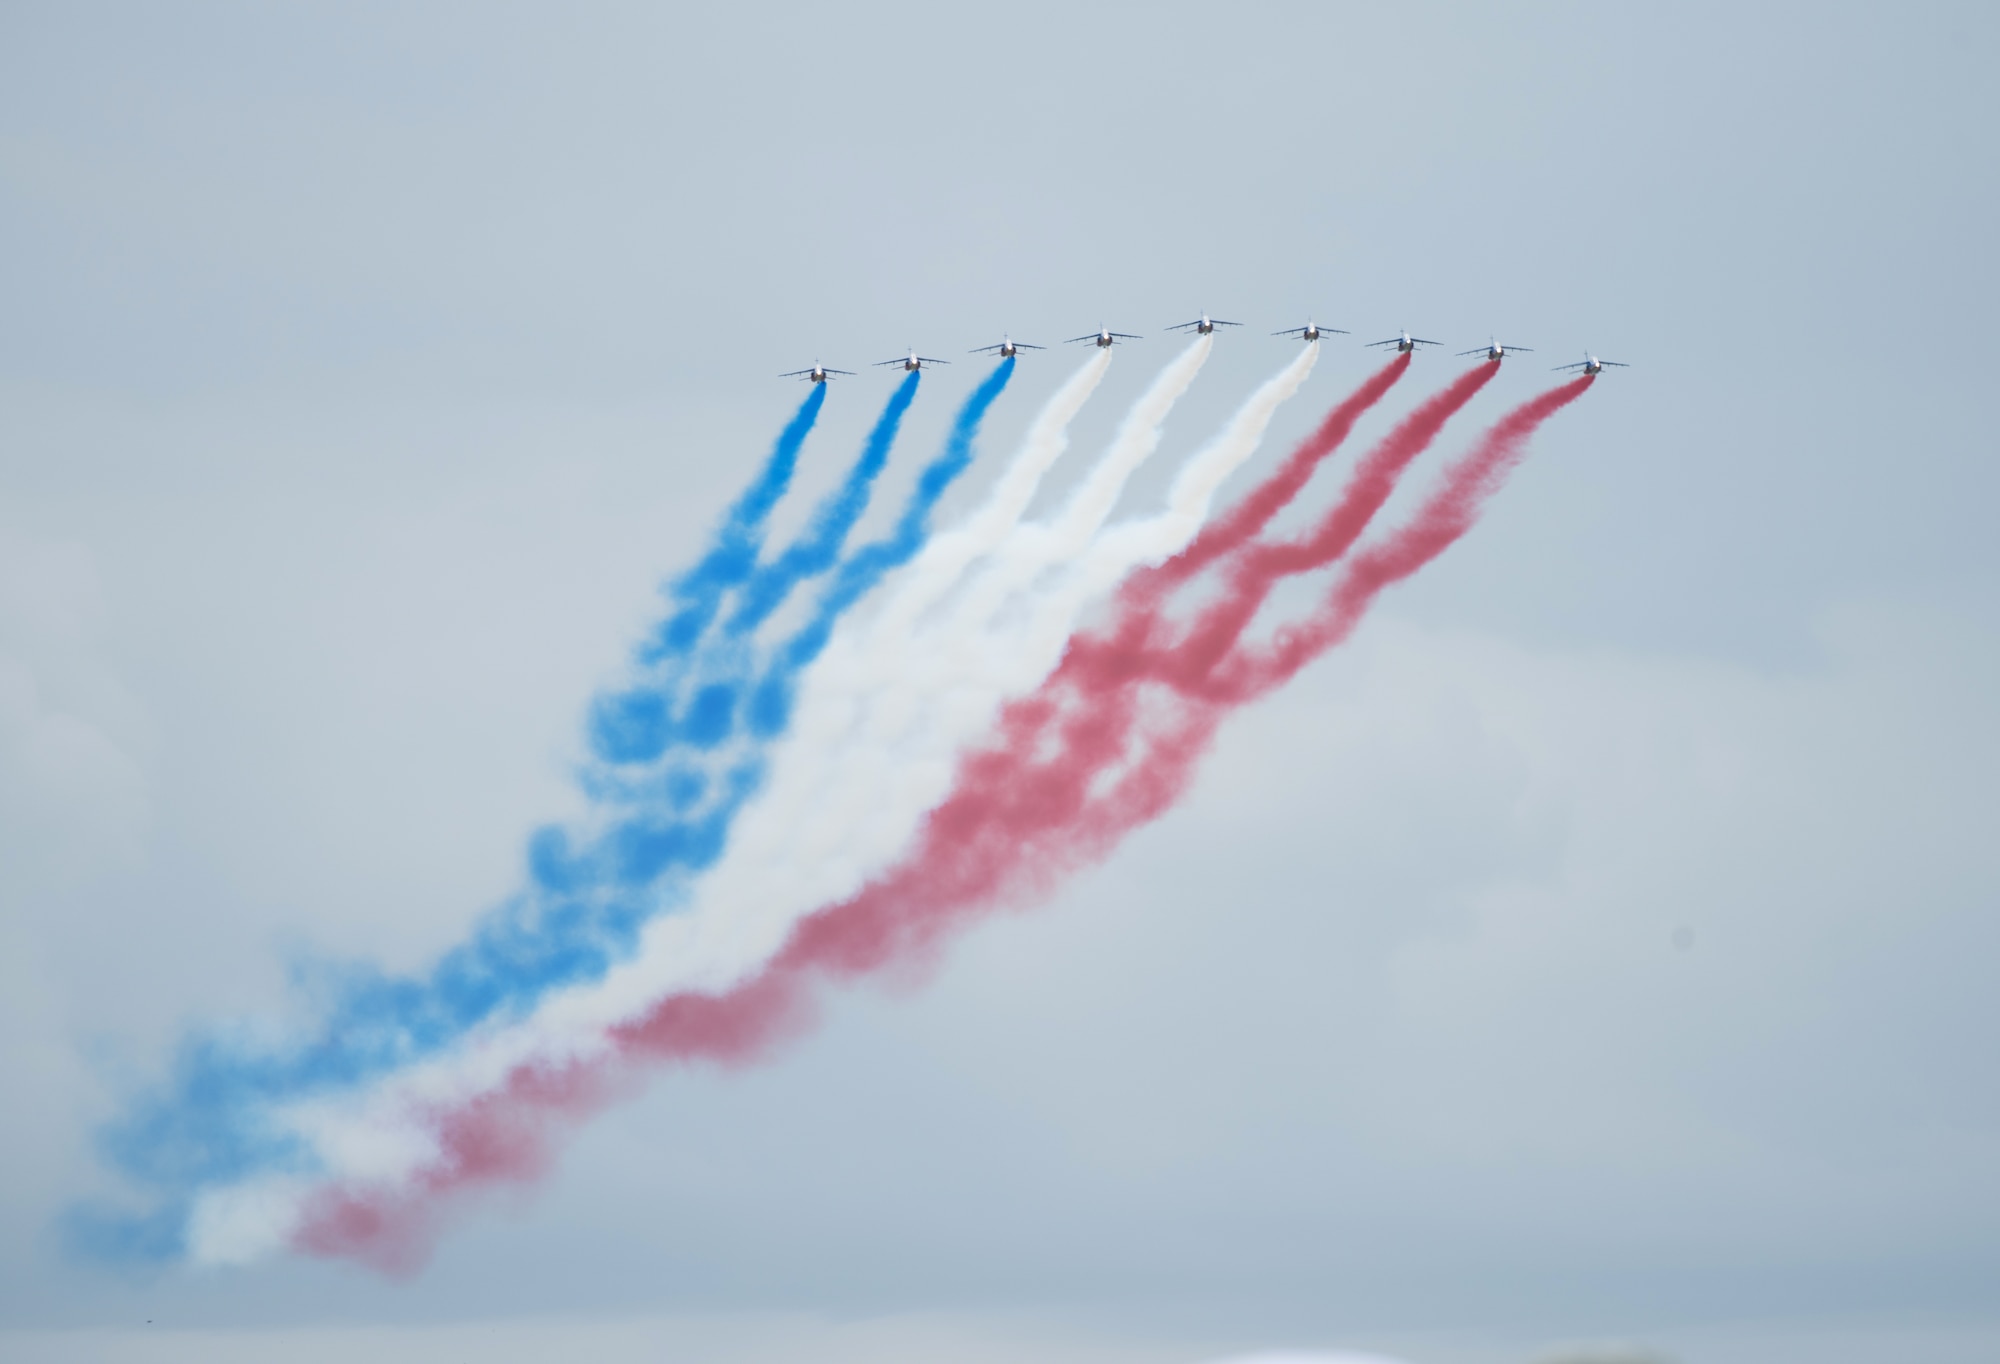 The French national aerobatic team, Patrouille Acrobatique de France, performs aerial demonstrations at the D-Day 75 Commemorative Airborne Operation in Sainte-Mere-Eglise, France, June 9, 2019, which honors the epic airborne operation conducted by Allied forces on June 6, 1944. This commemorative airborne operation was an opportunity for multinational forces to honor the past and simultaneously work to secure the future. Training together in the very same place that trans-Atlantic resolve began 75 years ago demonstrates the partnerships and bonds that we highly value and continue to benefit from to this day. (U.S. Air Force photo by Airman 1st Class Jennifer Zima)